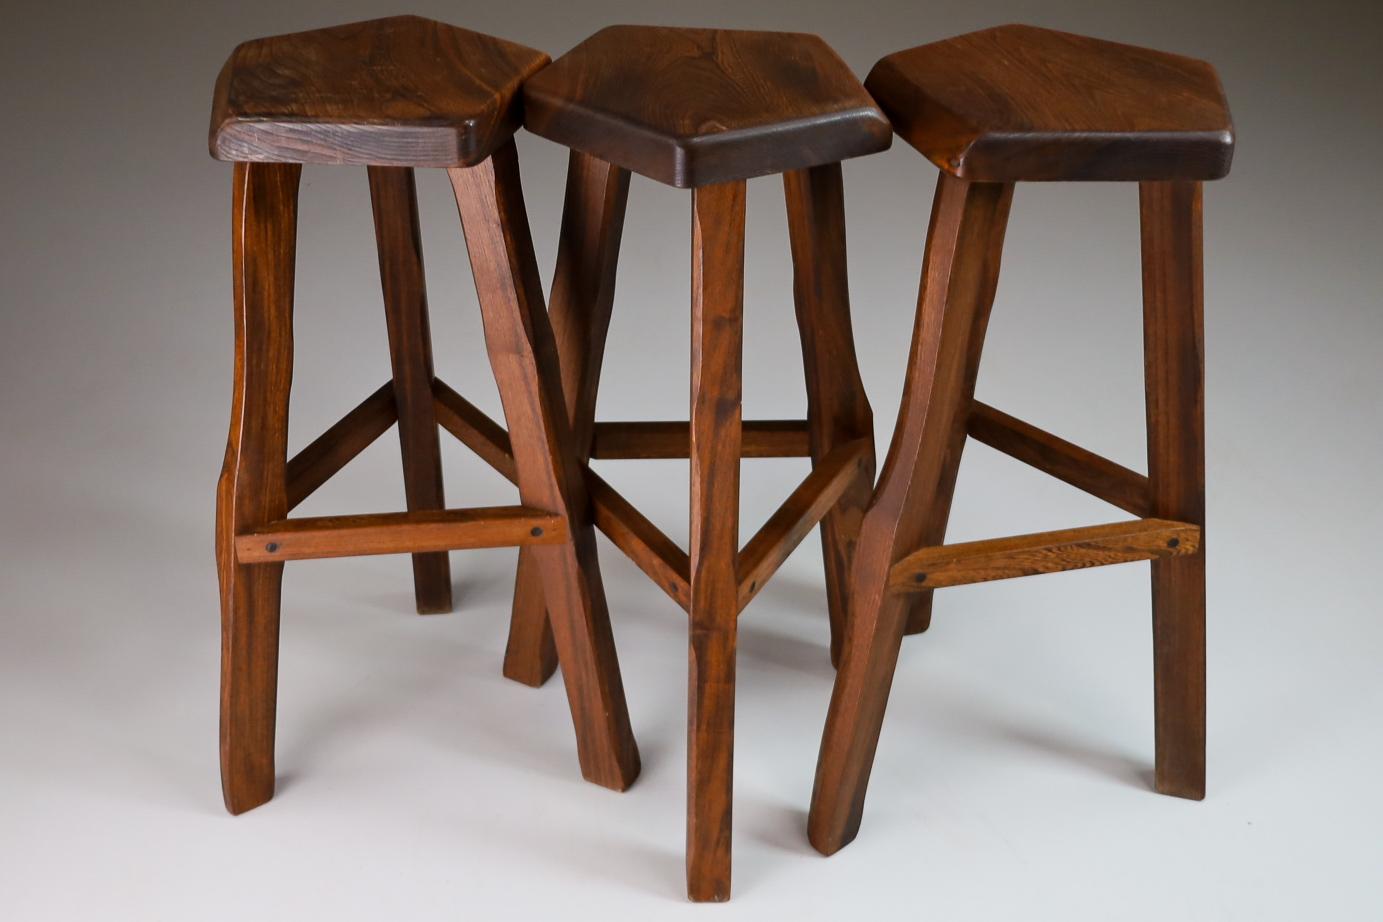 This set of organic modern stools by Olavi Hänninen has been made by hand from solid elm. A thick pentagonal seat sits on top of three splayed legs braces midway down. The edges of all the wooden pieces have been smoothened giving them a softer look